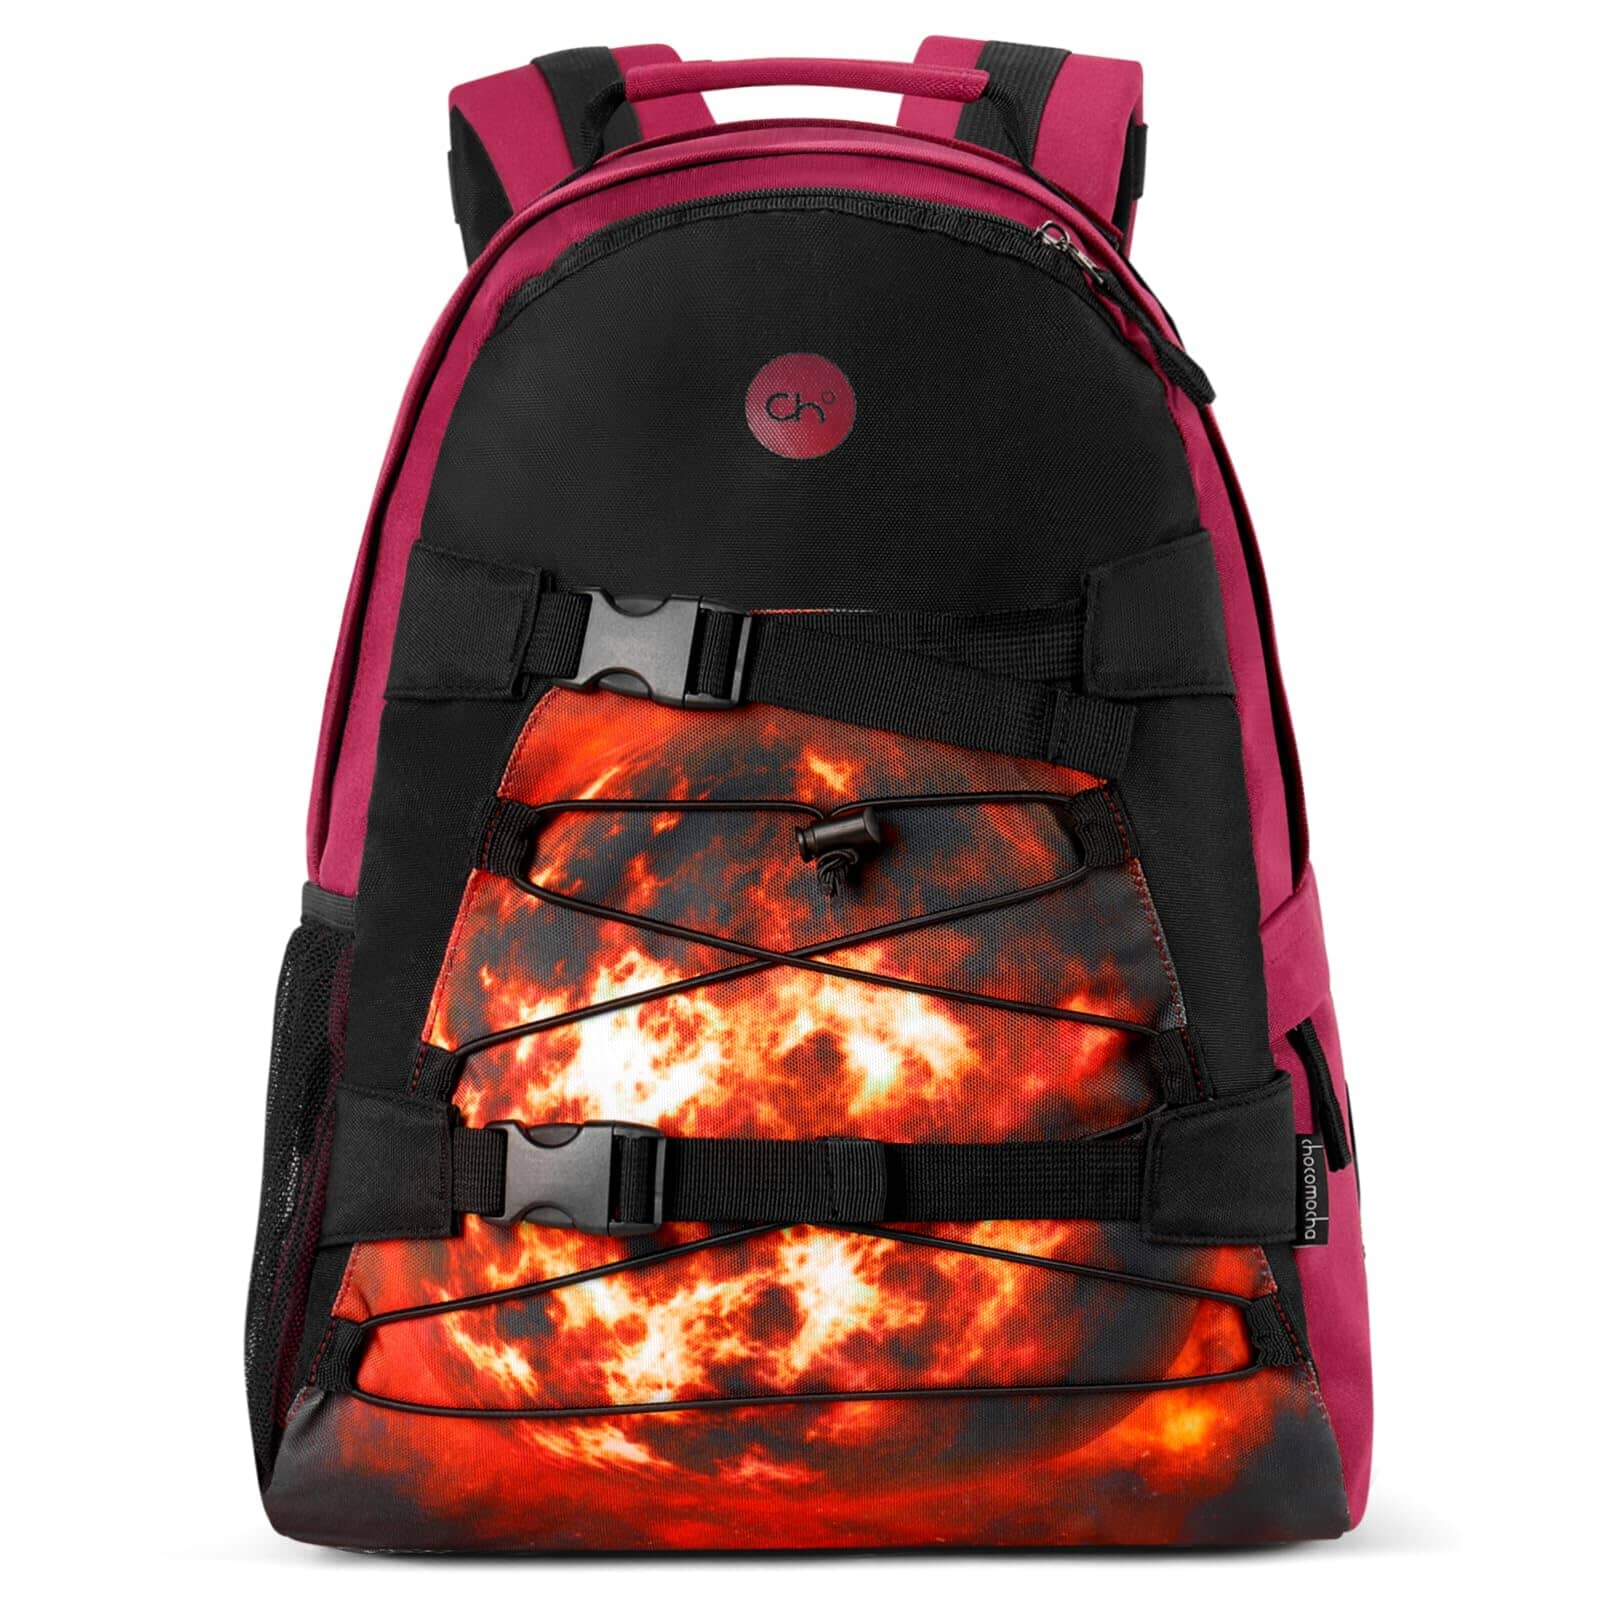 Choco Mocha Boys Red Backpack for Elementary Middle School, Large Backpack for Kids Teen Boys, Fire, 18 Inch chocomochakids 